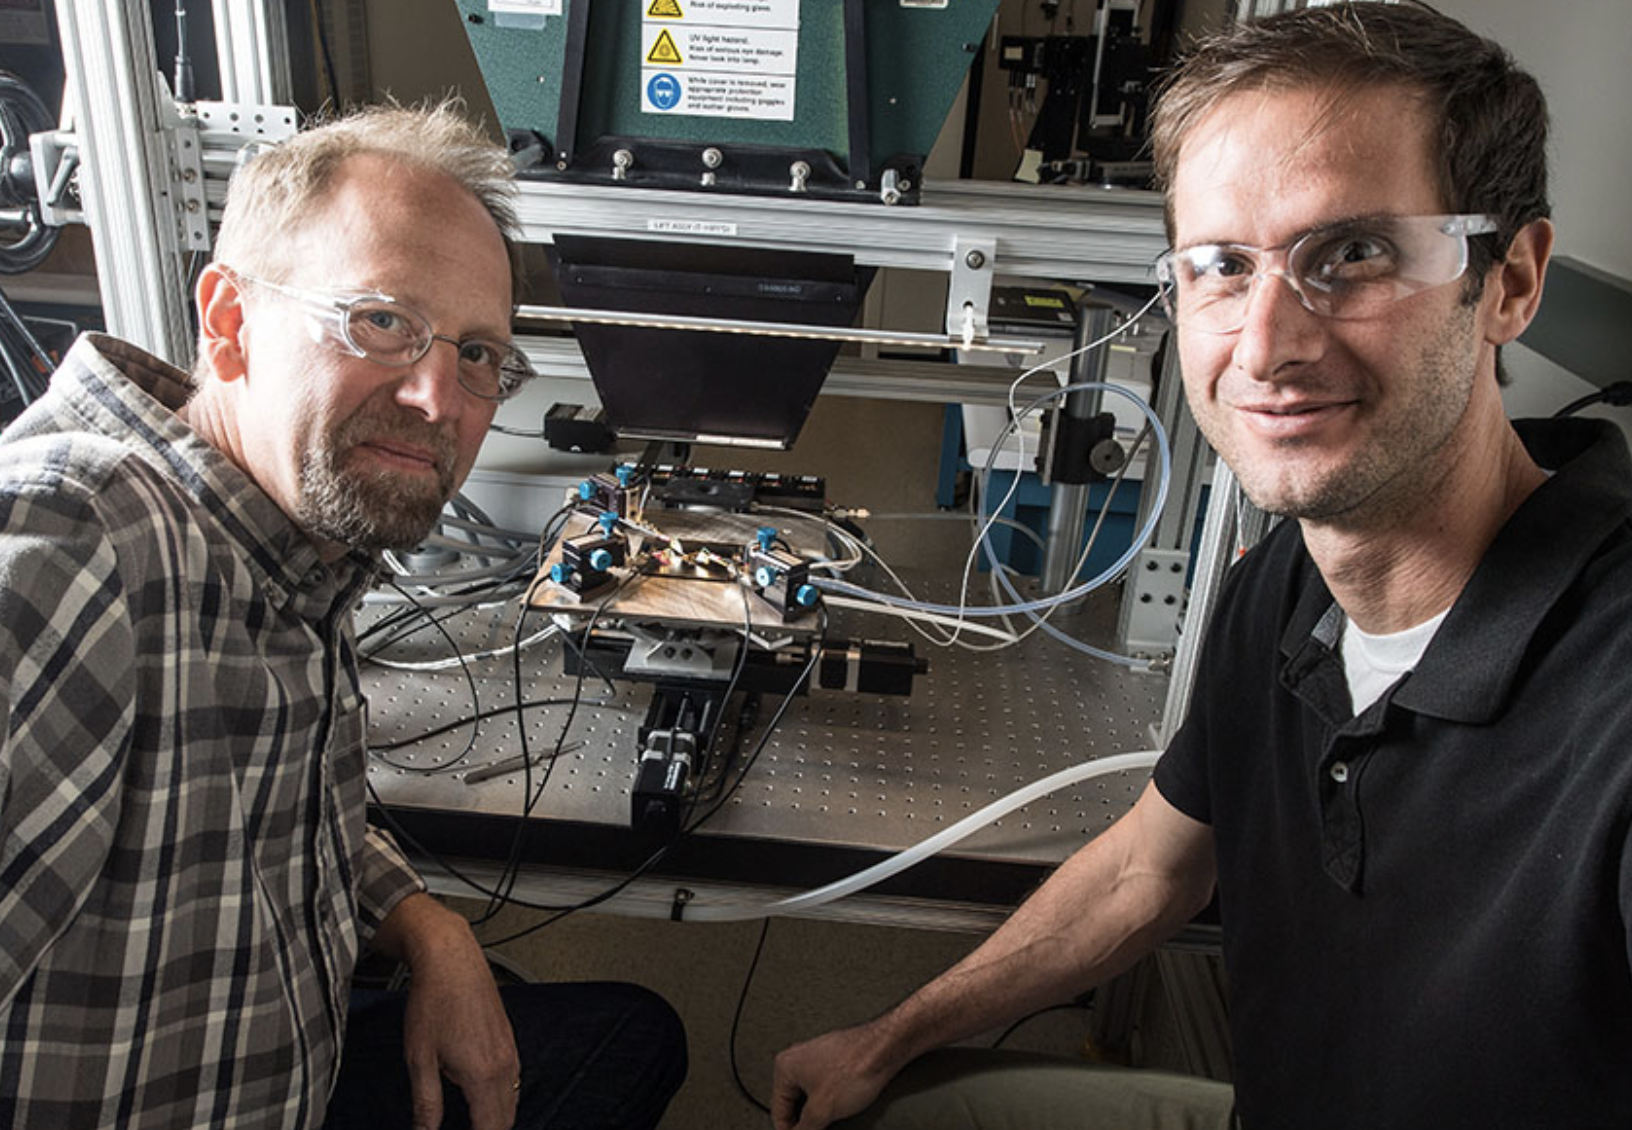 Scientists John Geisz, left, and Ryan France at the U.S. National Renewable Energy Laboratory have created a solar cell that is nearly 50 percent efficient. 2020 (Photo by Dennis Schroeder courtesy NREL) Posted for media use